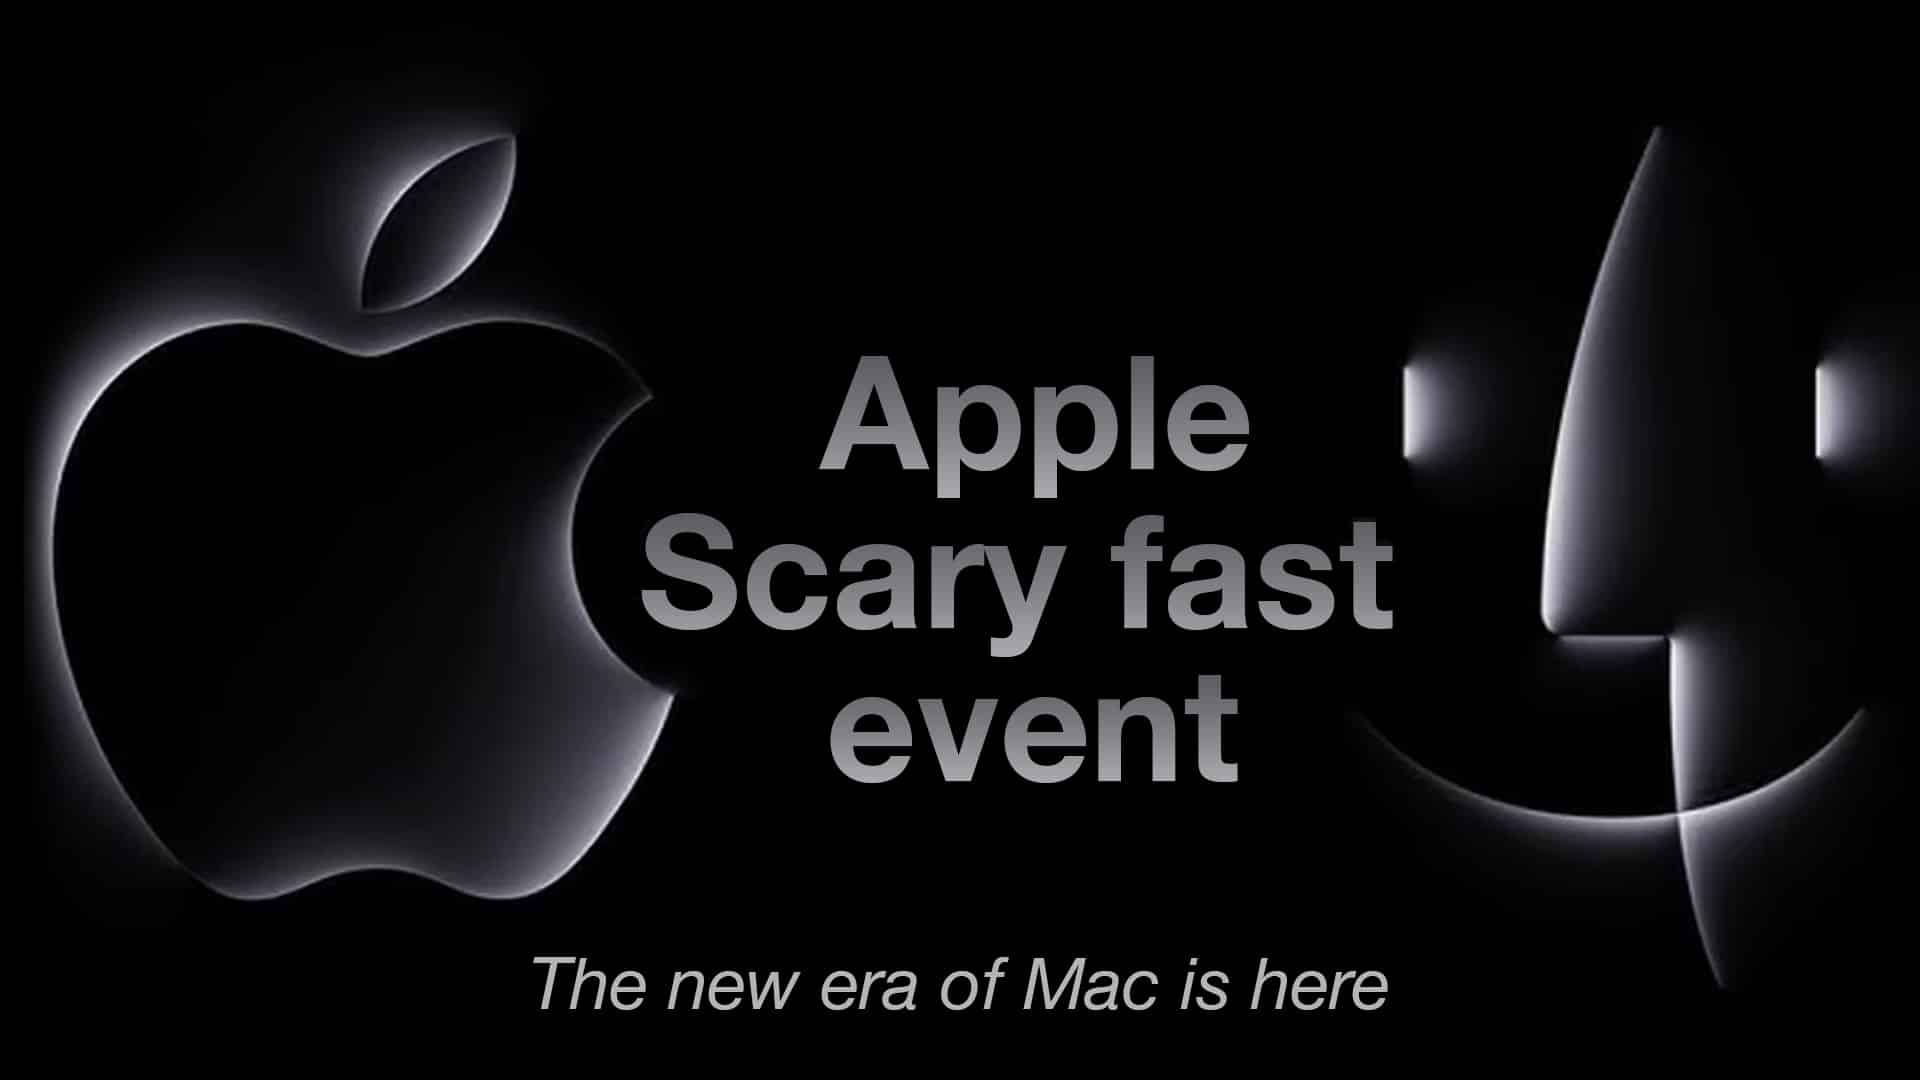 Apple Scary